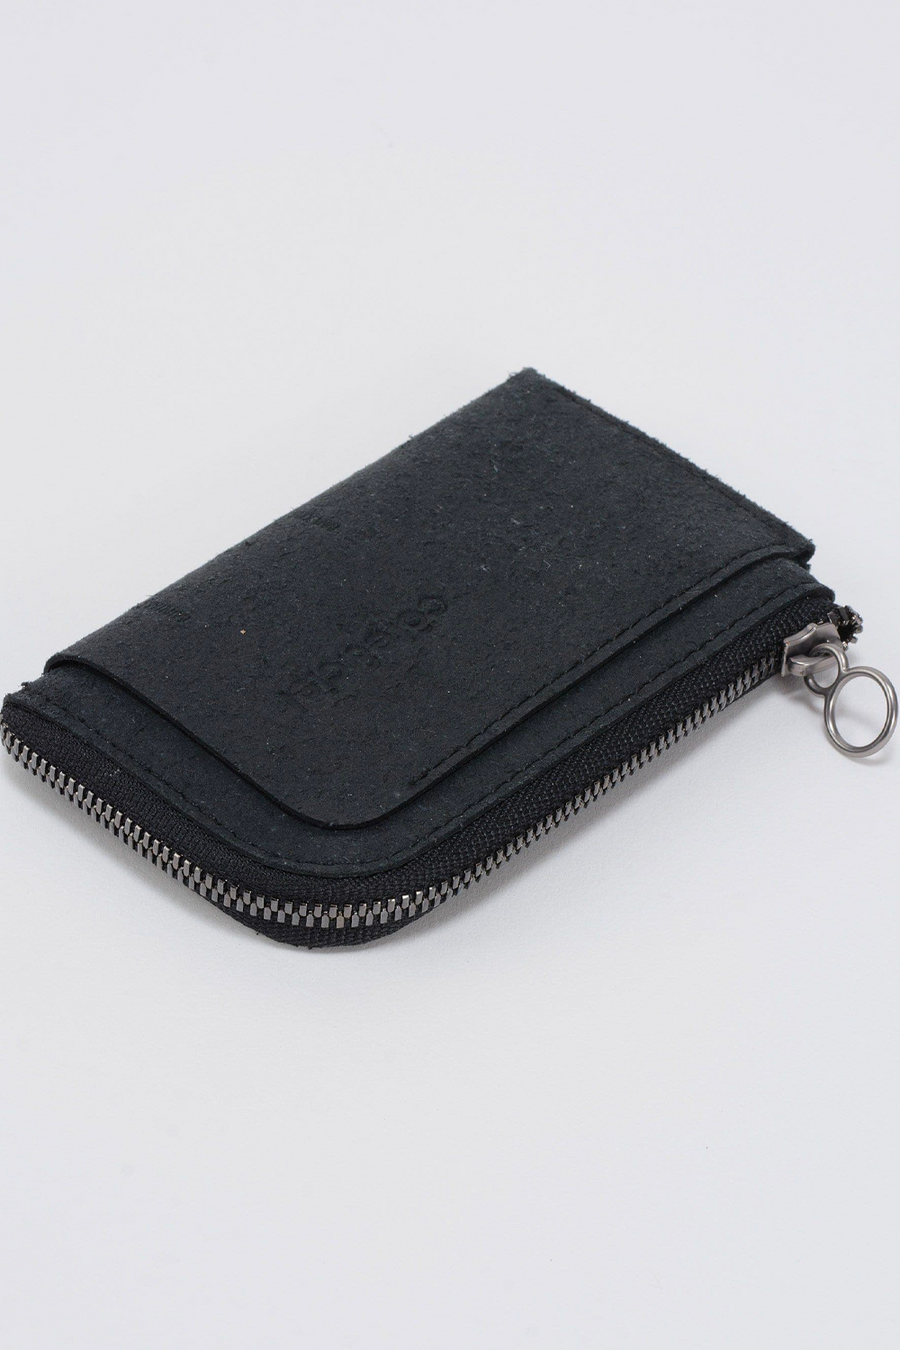 Buy the Cote & Ciel Zippered Wallet Recycled Leather in Black at Intro. Spend £50 for free UK delivery. Official stockists. We ship worldwide.